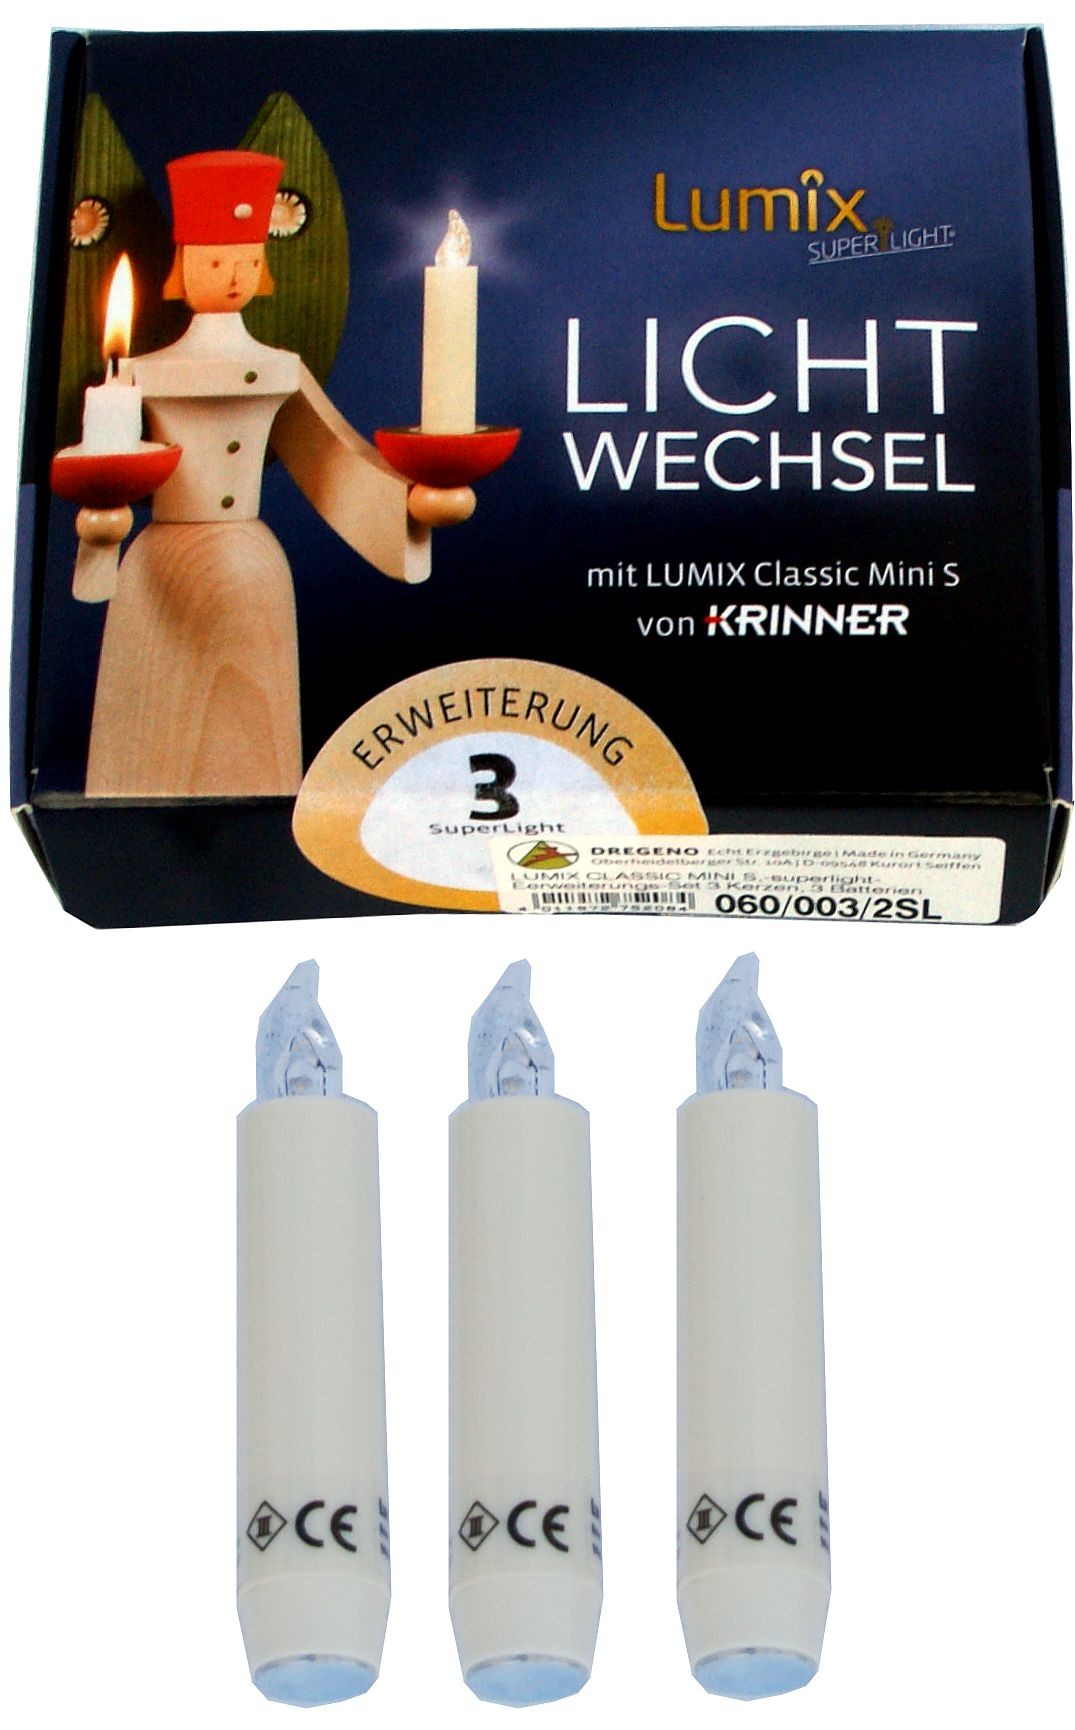 three additional candles for lumix classics basis 